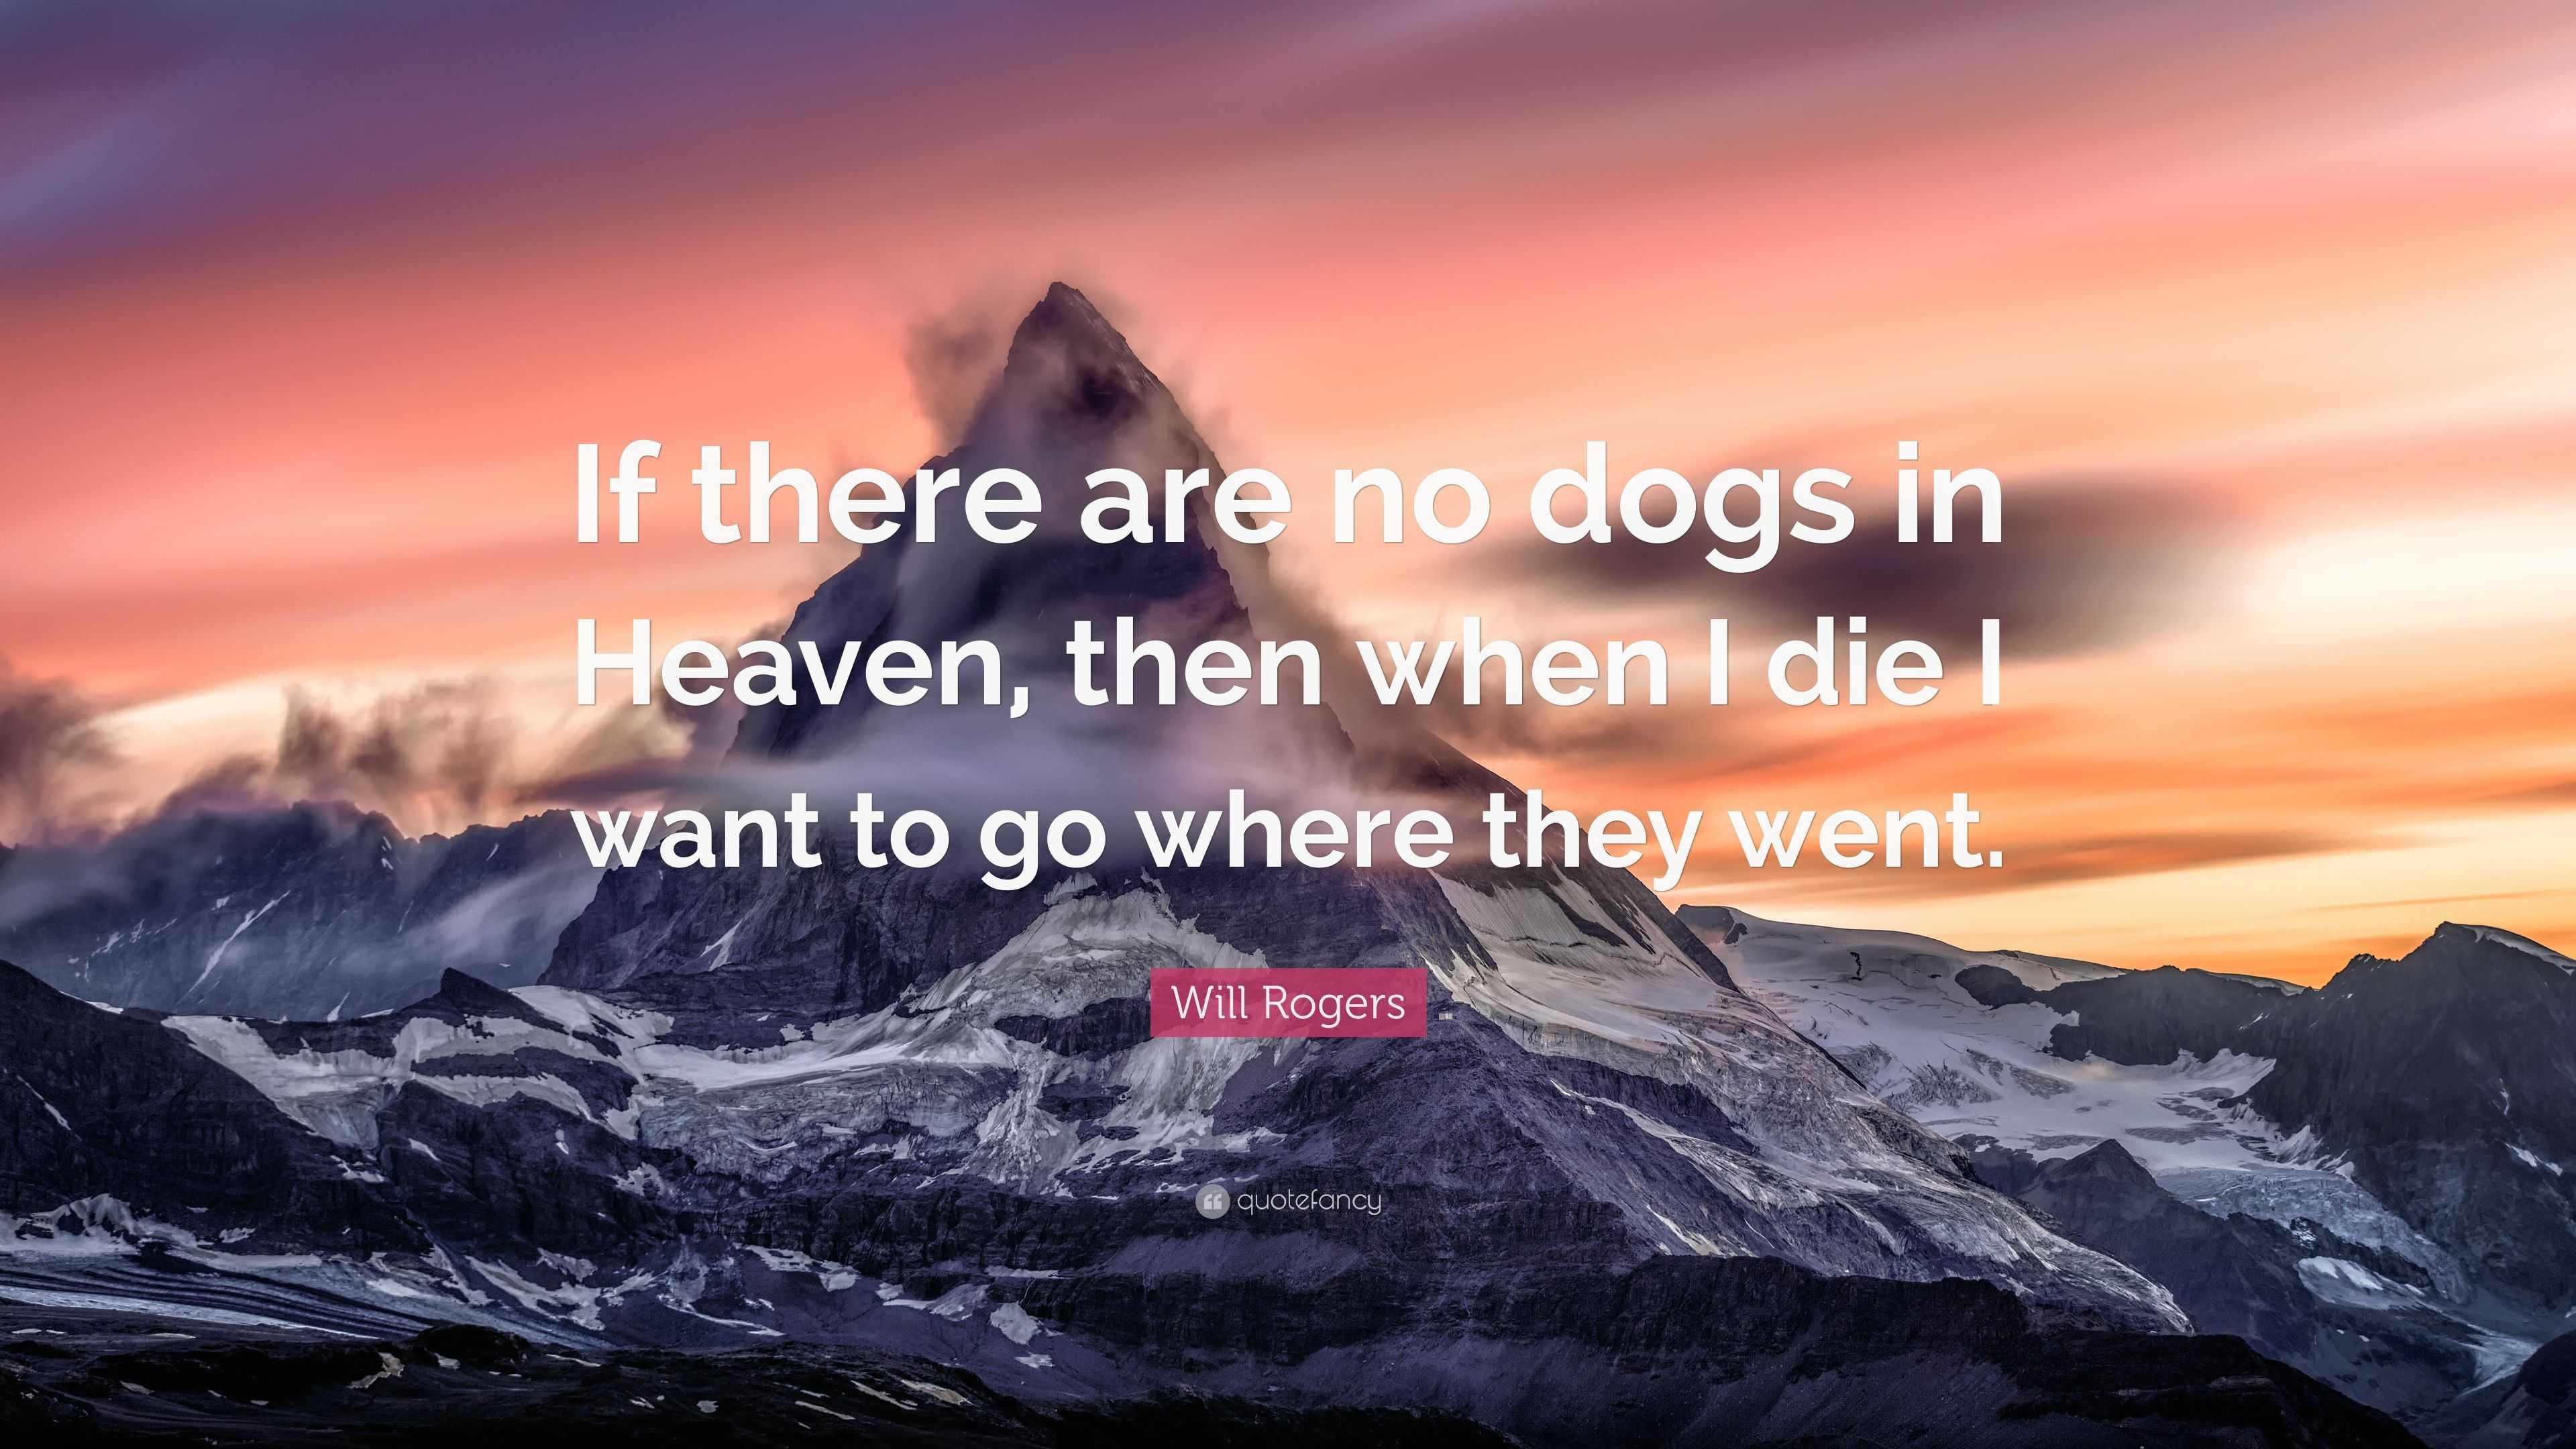 Will Rogers Quote: "If there are no dogs in Heaven, then when I die I want to go where they went ...